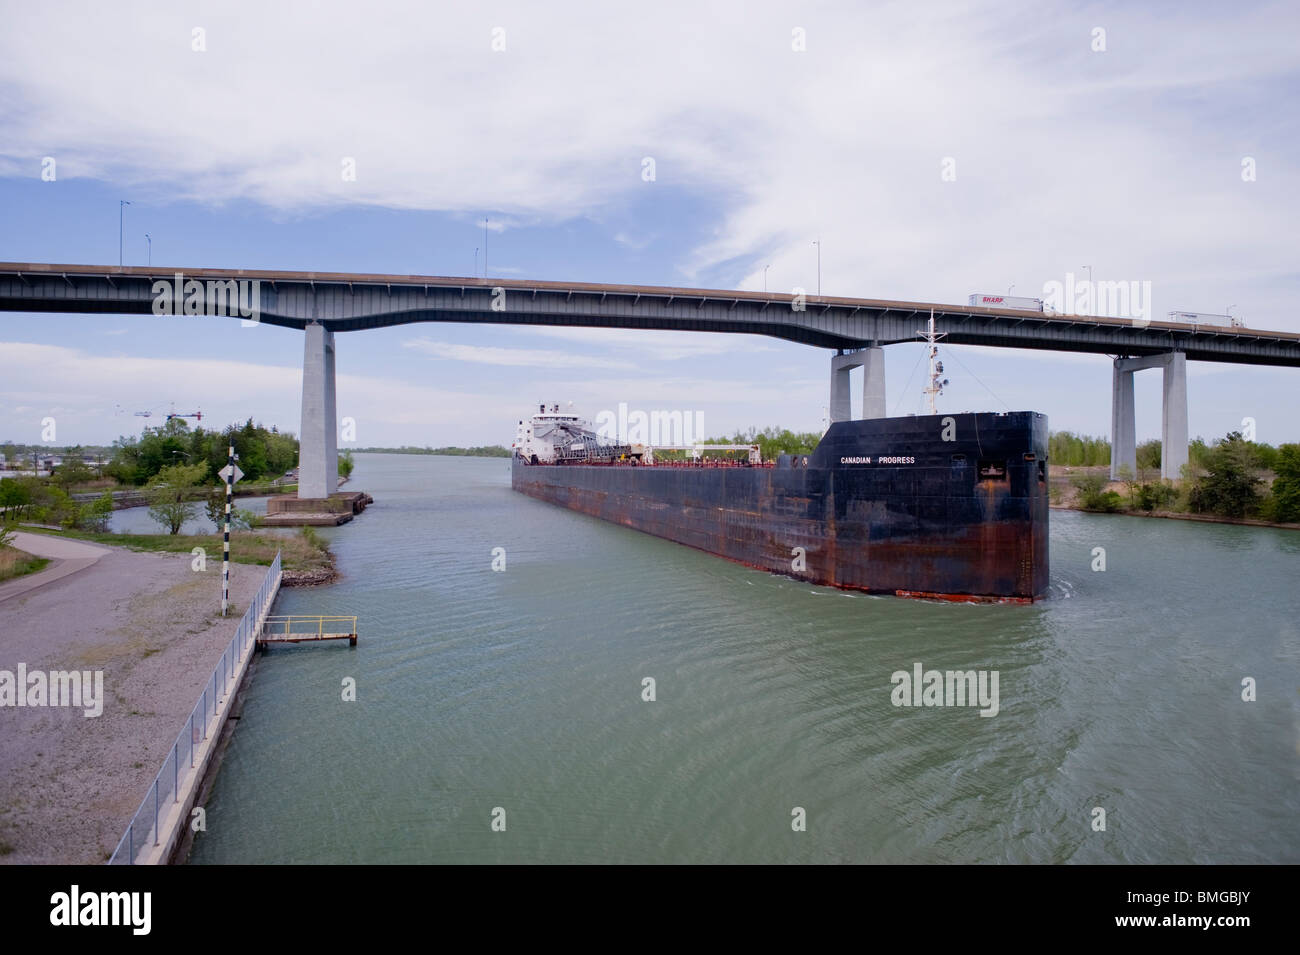 'Laker' style freighter passes under bridge on the Welland Canal, St. Catherines, Ontario, Canada. Stock Photo